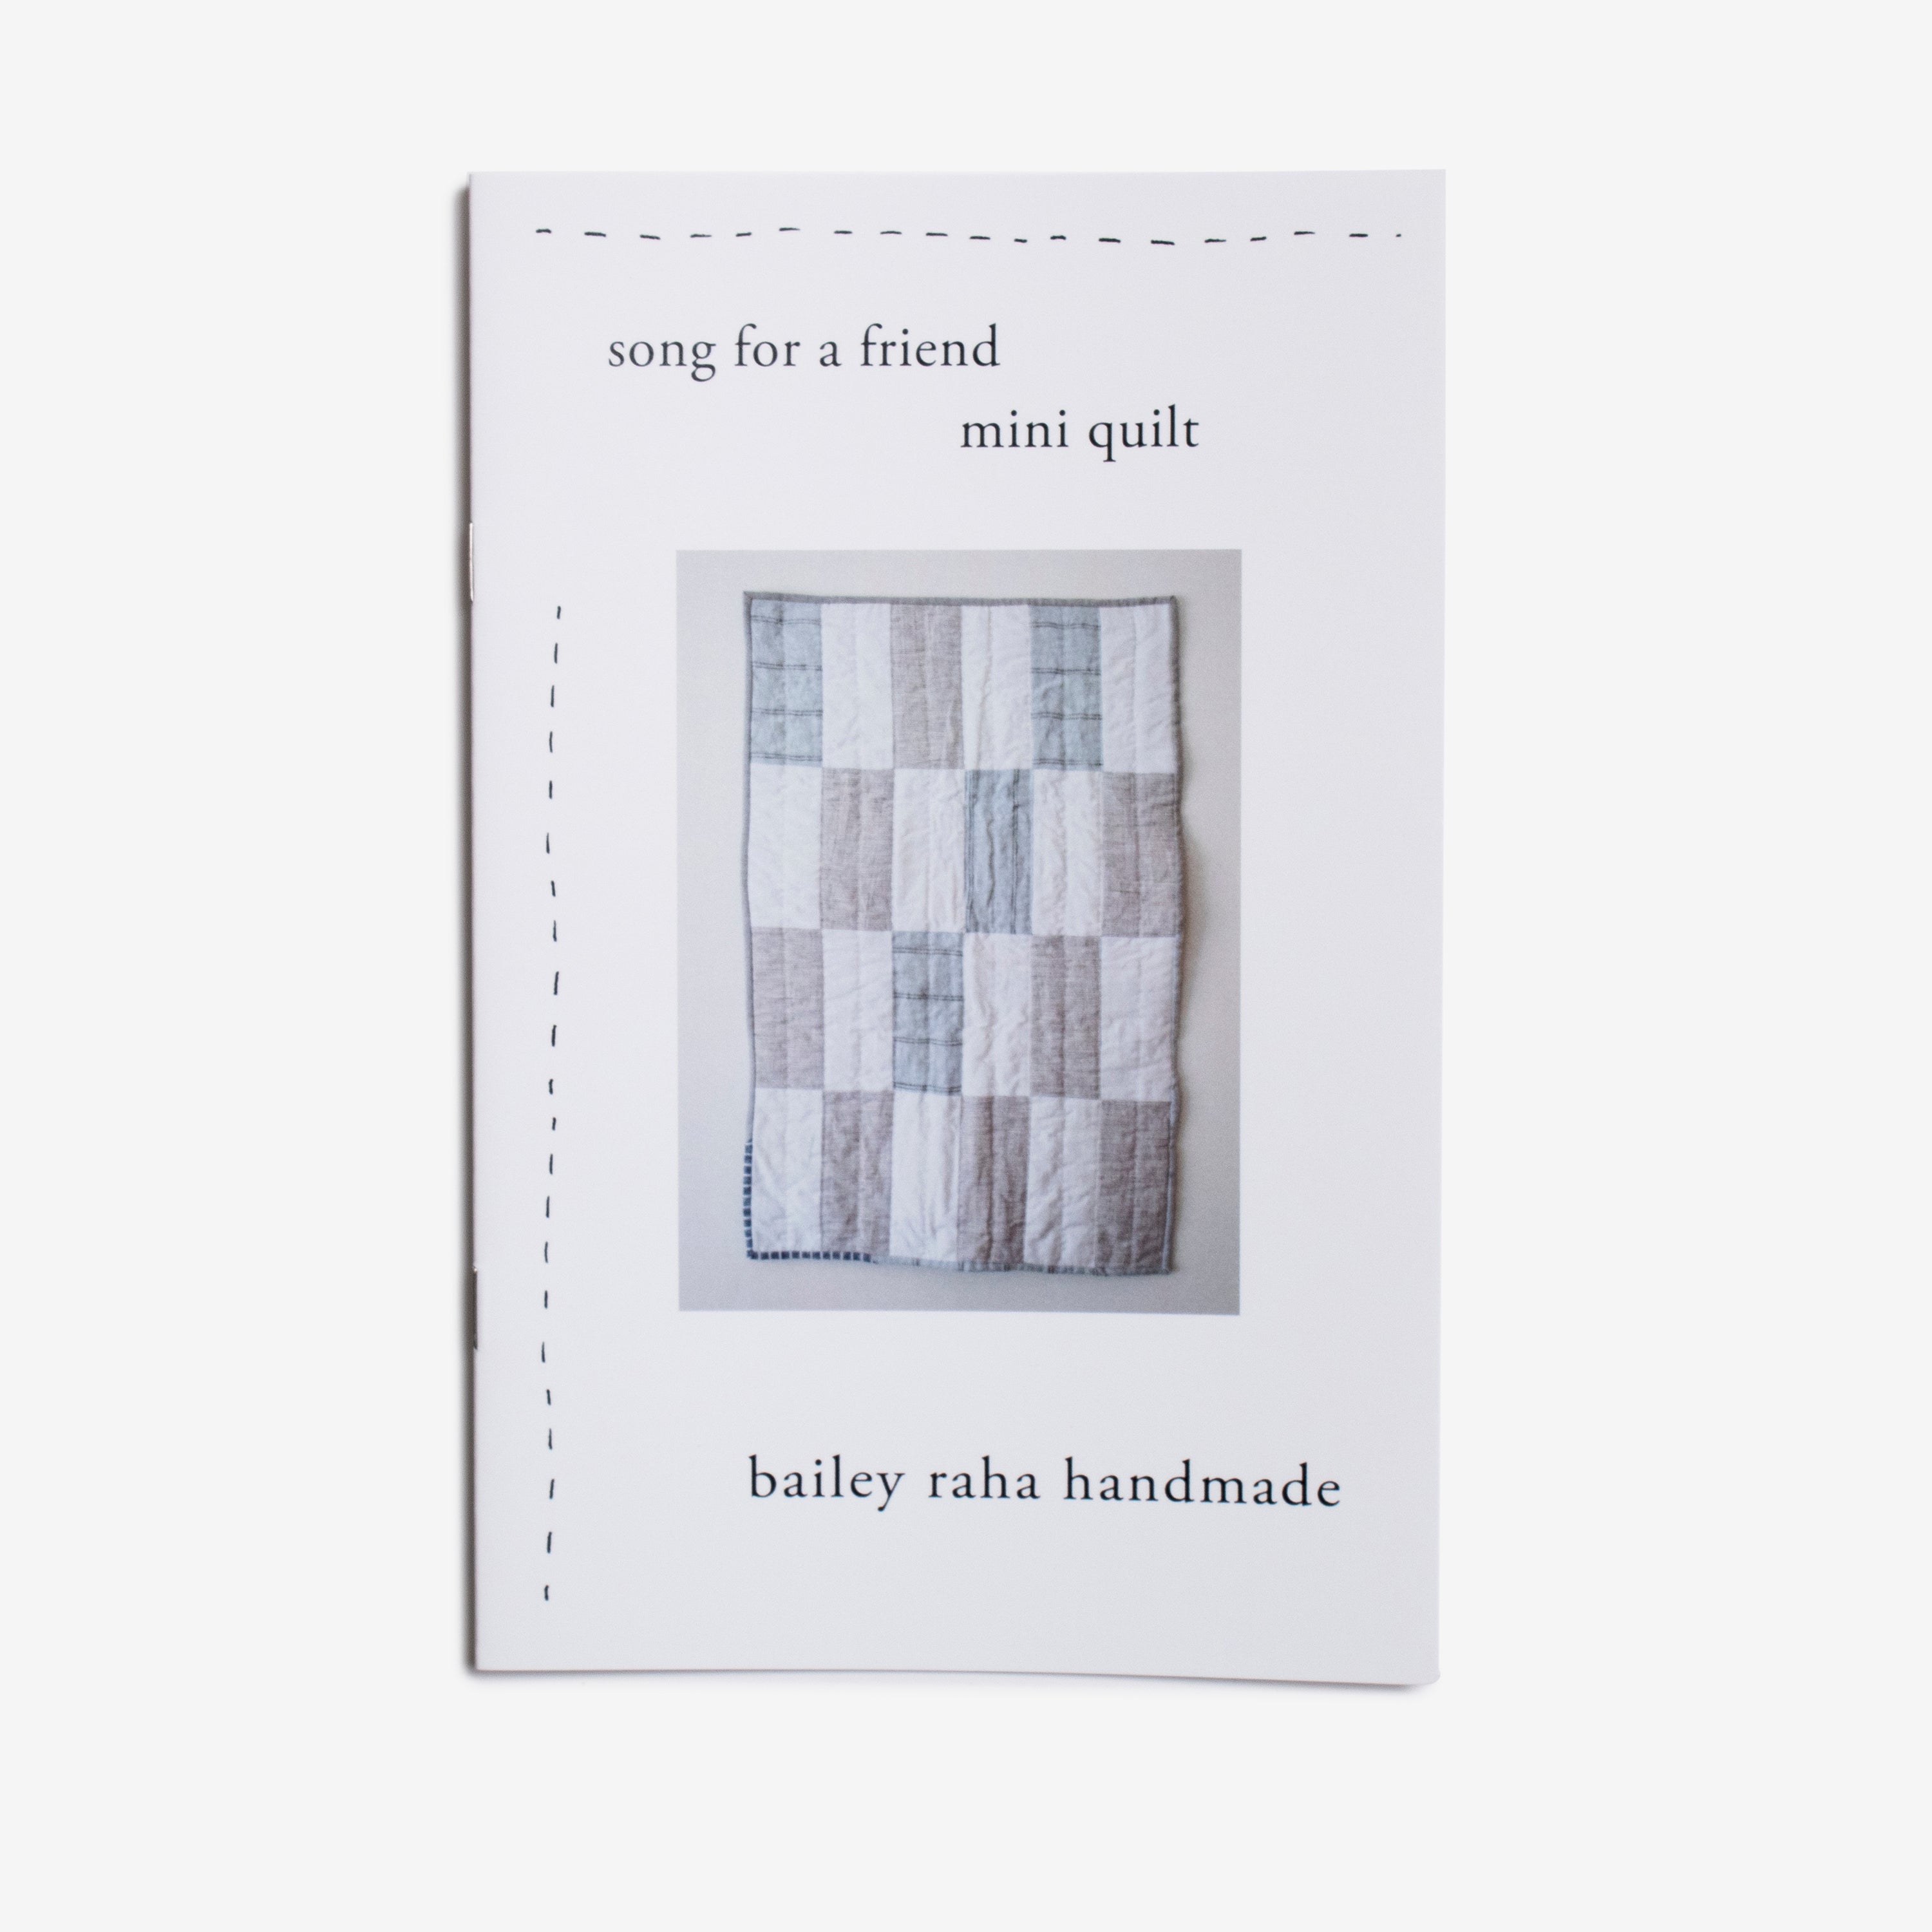 song for a friend mini quilt